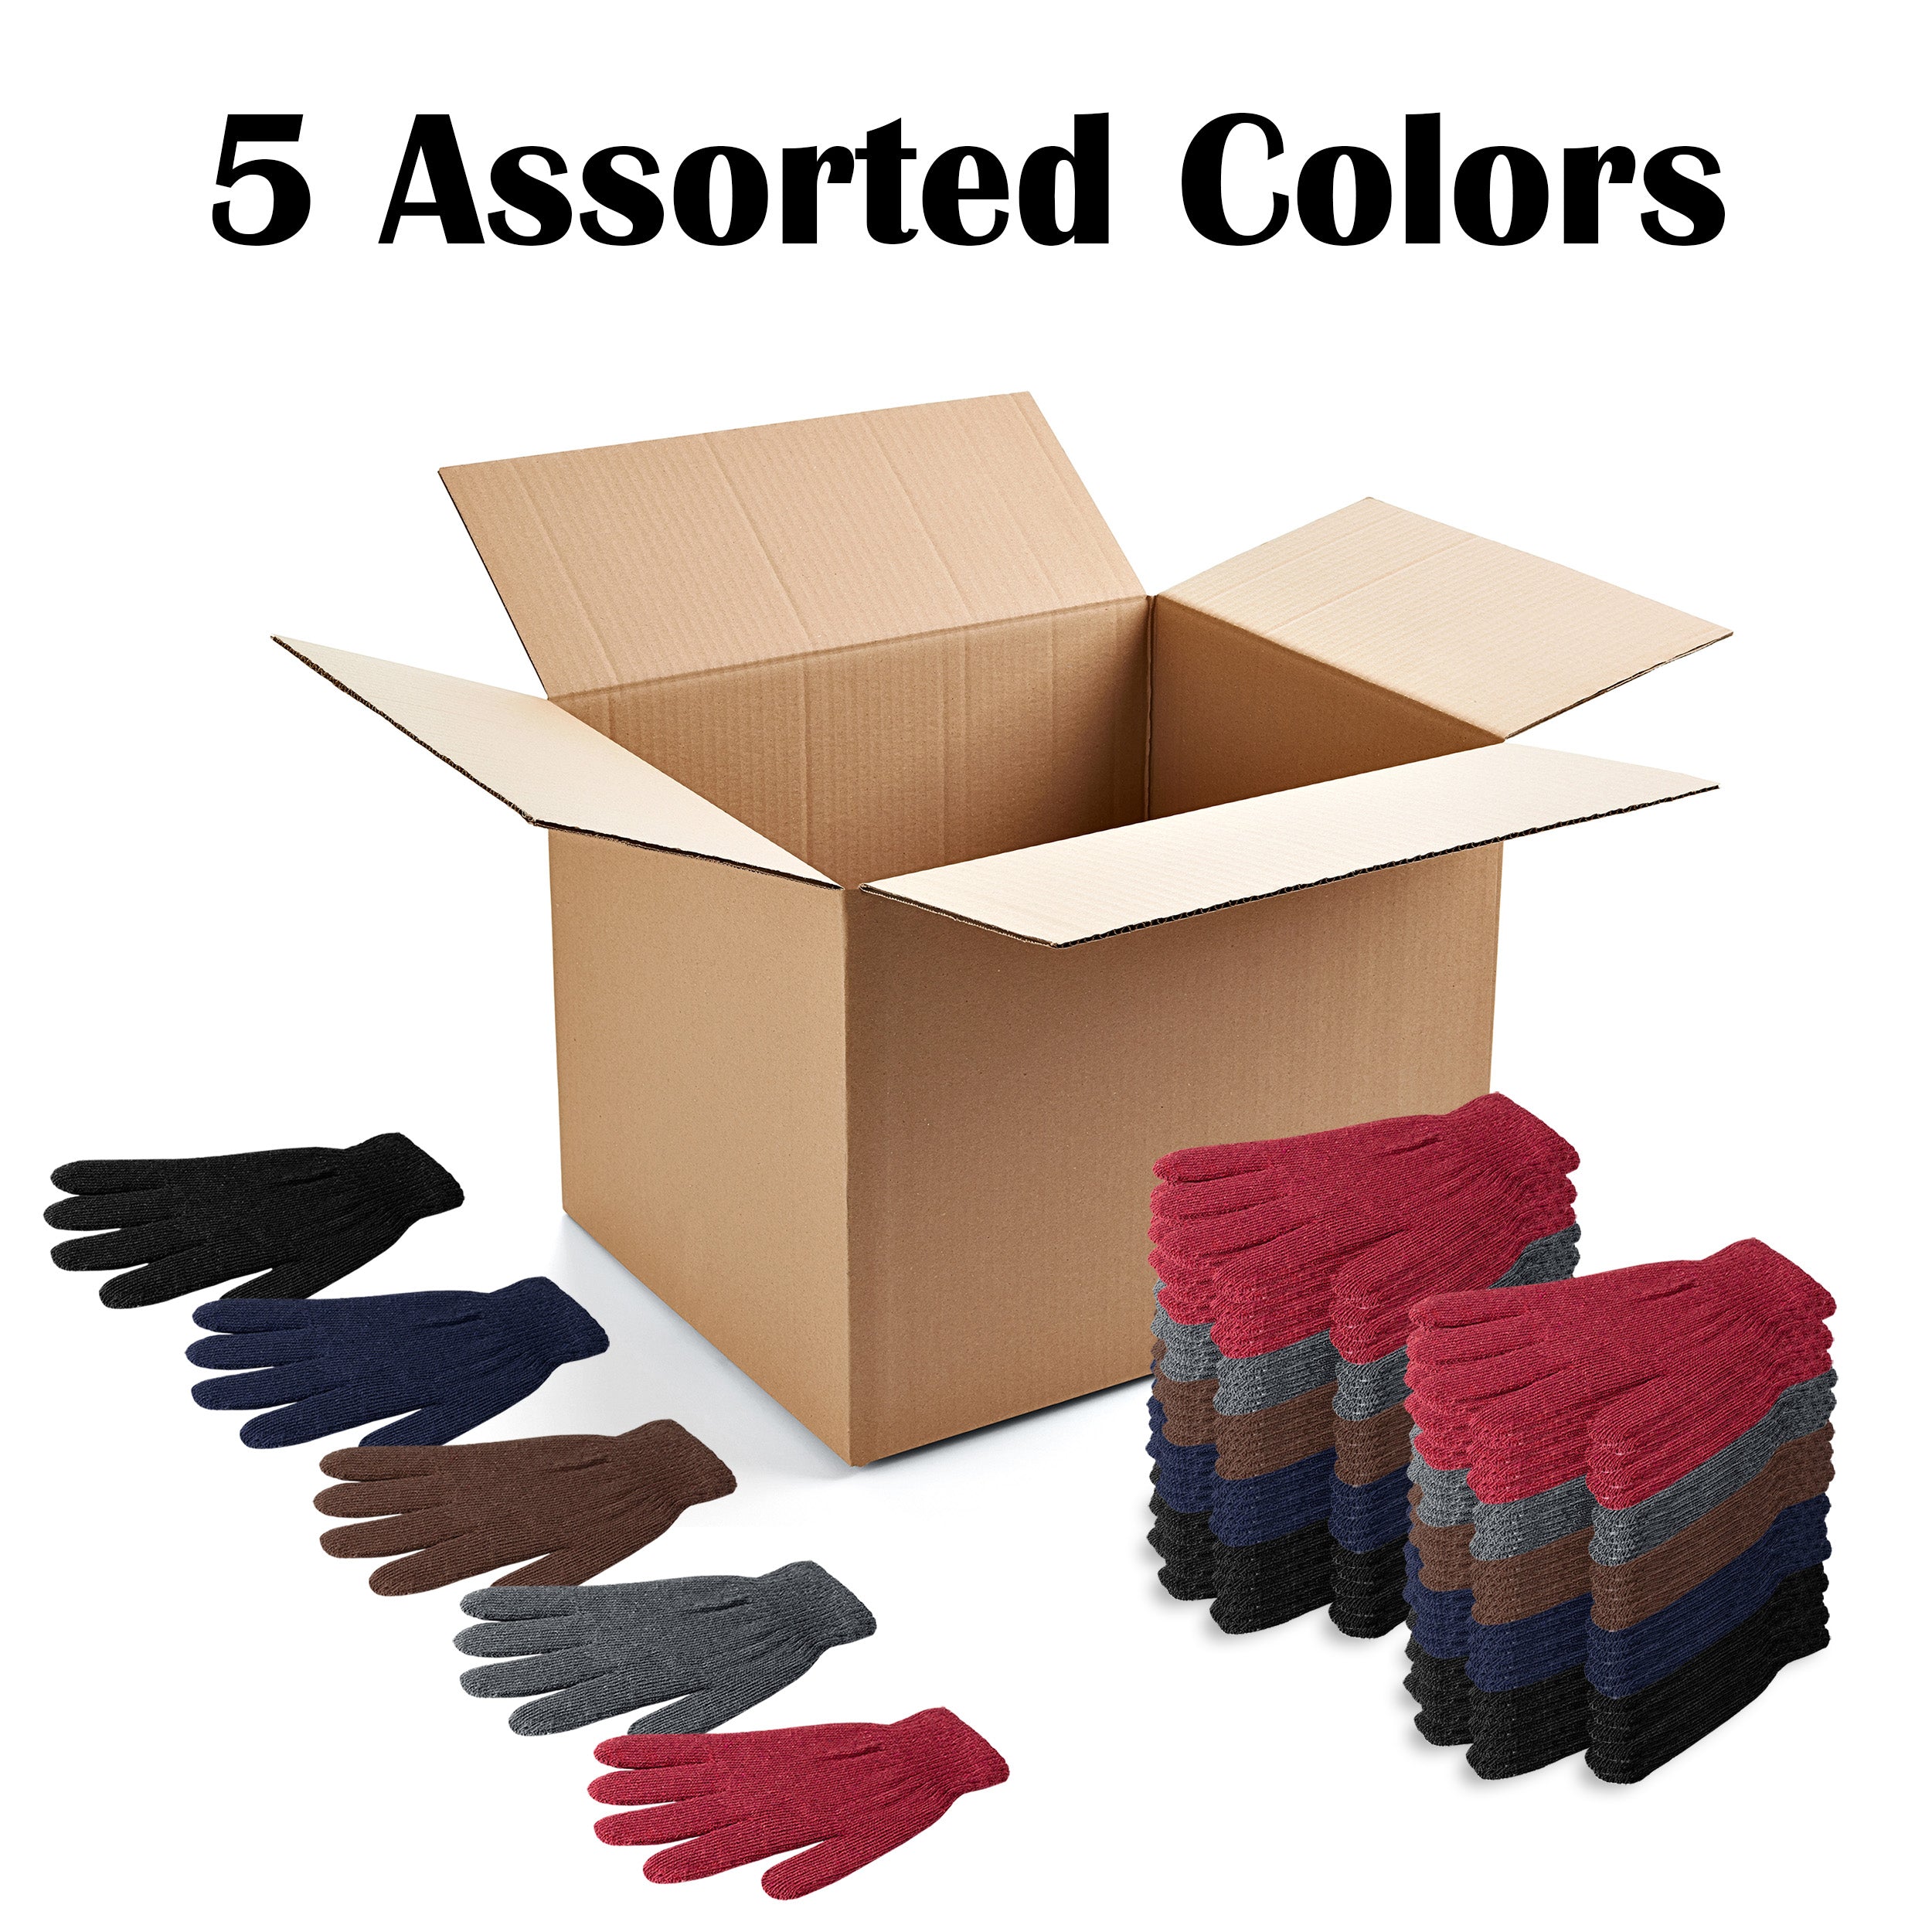 Unisex Winter Wholesale Gloves in 5 Assorted Colors - Bulk Case of 96 Pairs